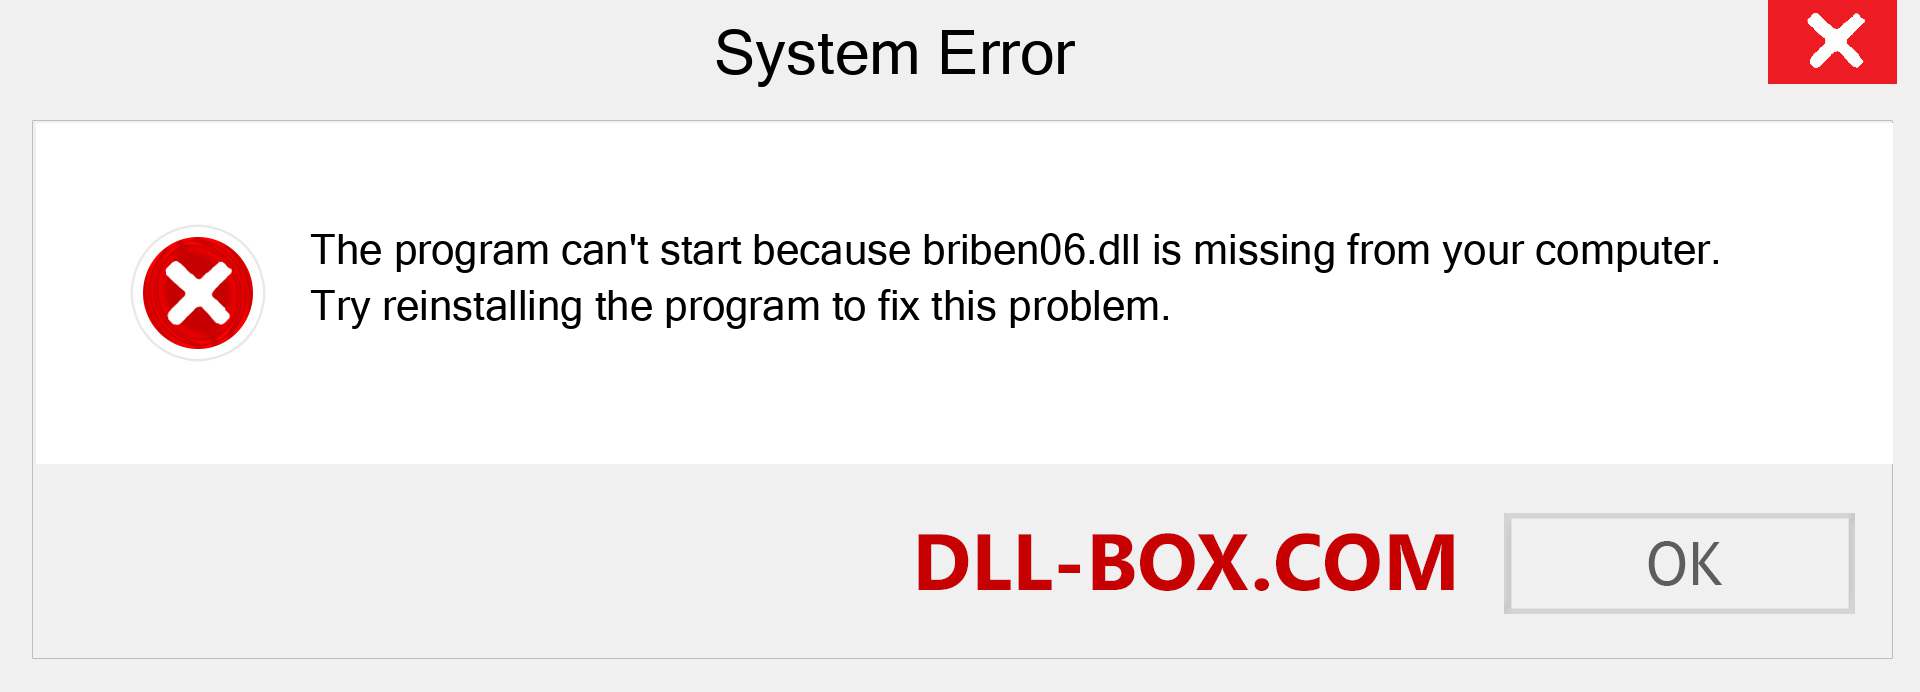  briben06.dll file is missing?. Download for Windows 7, 8, 10 - Fix  briben06 dll Missing Error on Windows, photos, images